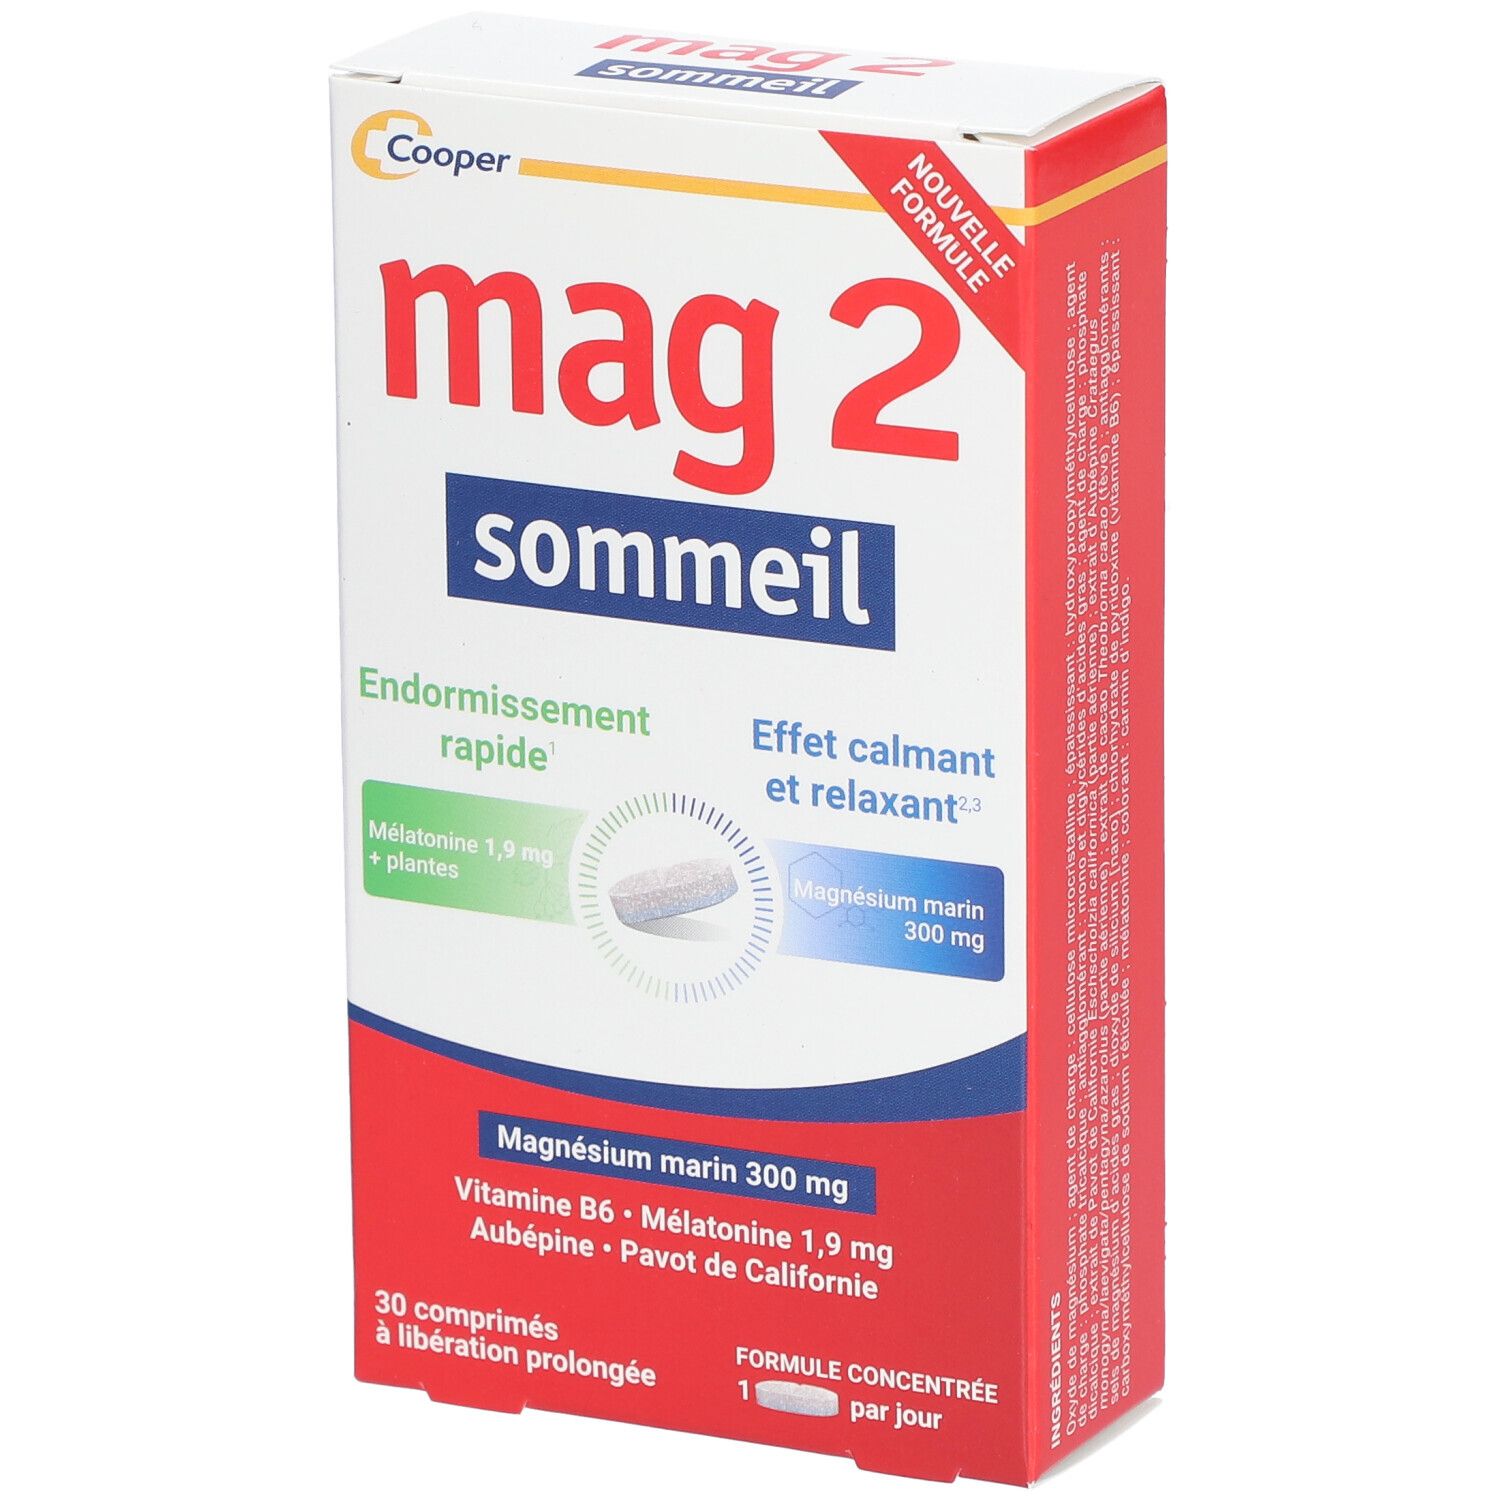 Cooper Mag 2 Sommeil